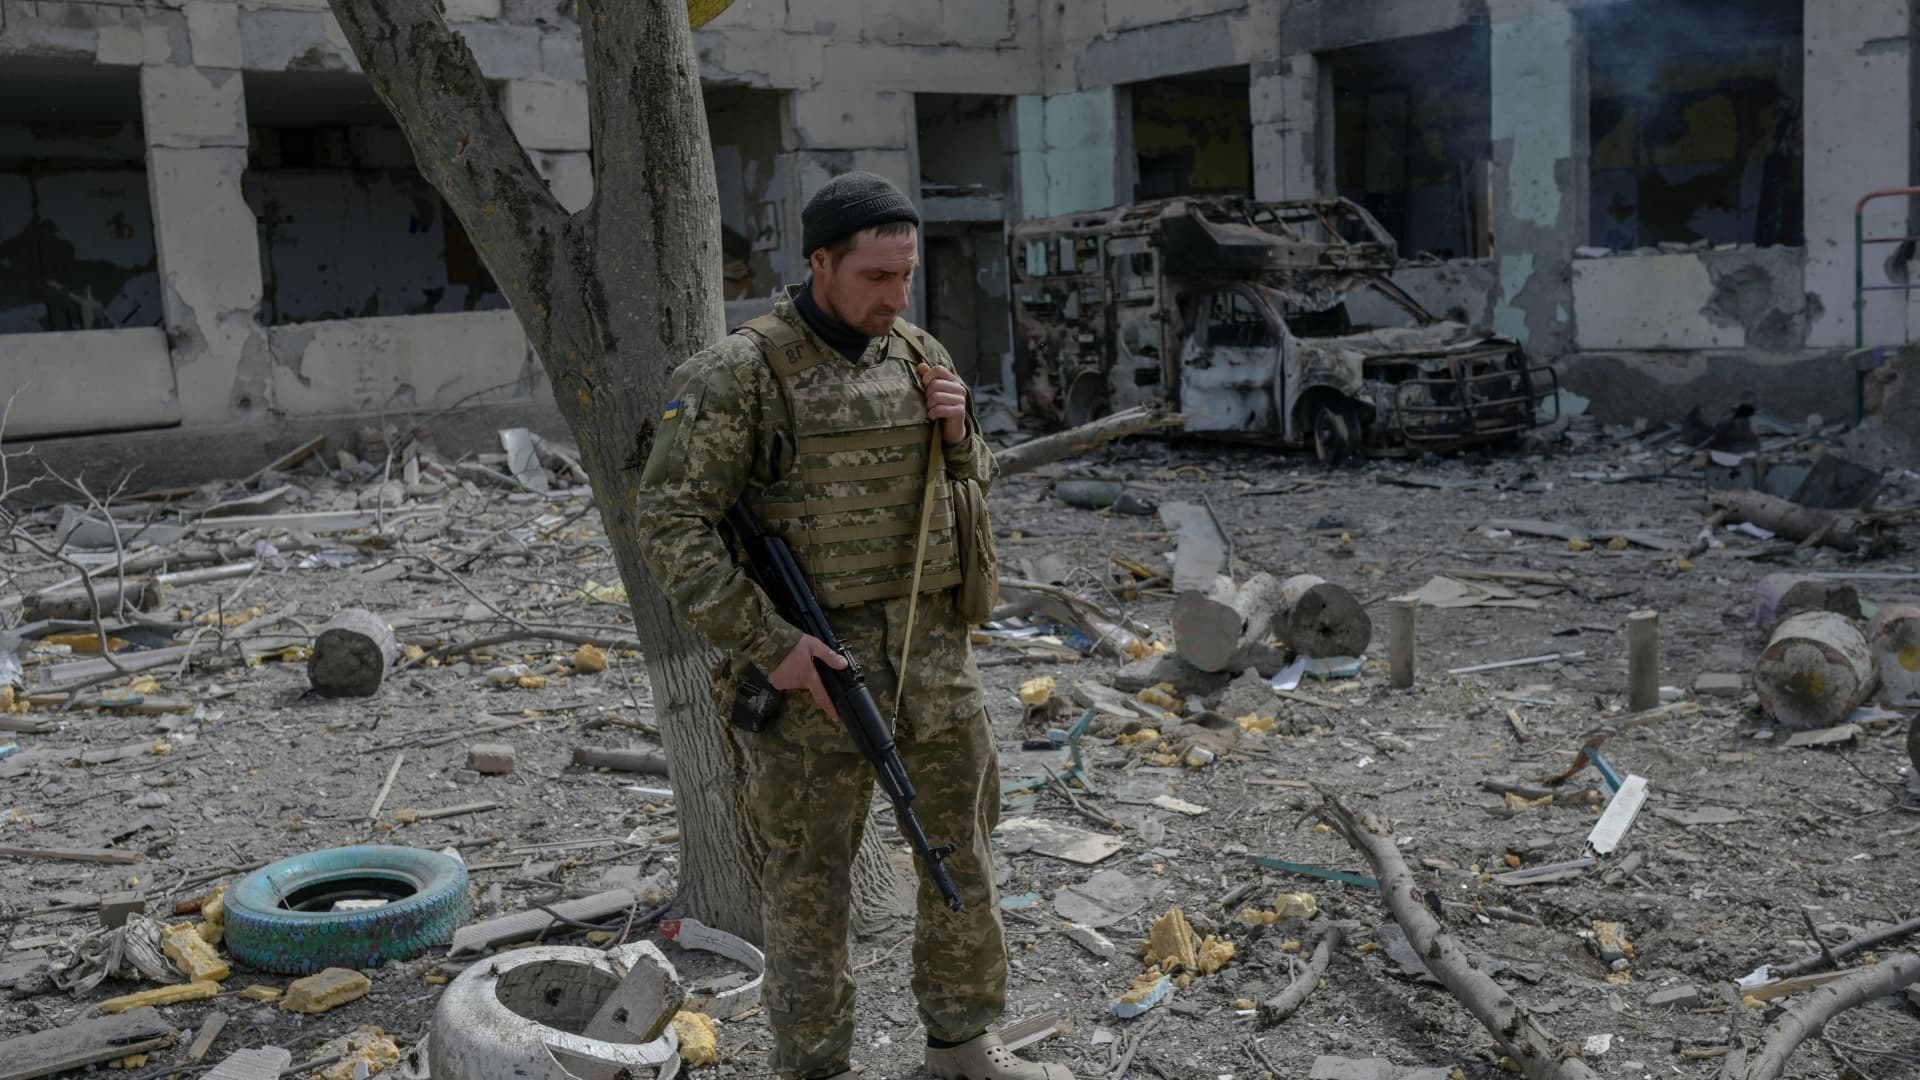 A Ukrainian soldier stands outside a school hit by Russian rockets in southern Ukraine village 220401. Russia is planning a staged referendum in Kherson, Ukraine, to justify its occupation, the British defense ministry said in an intelligence update.